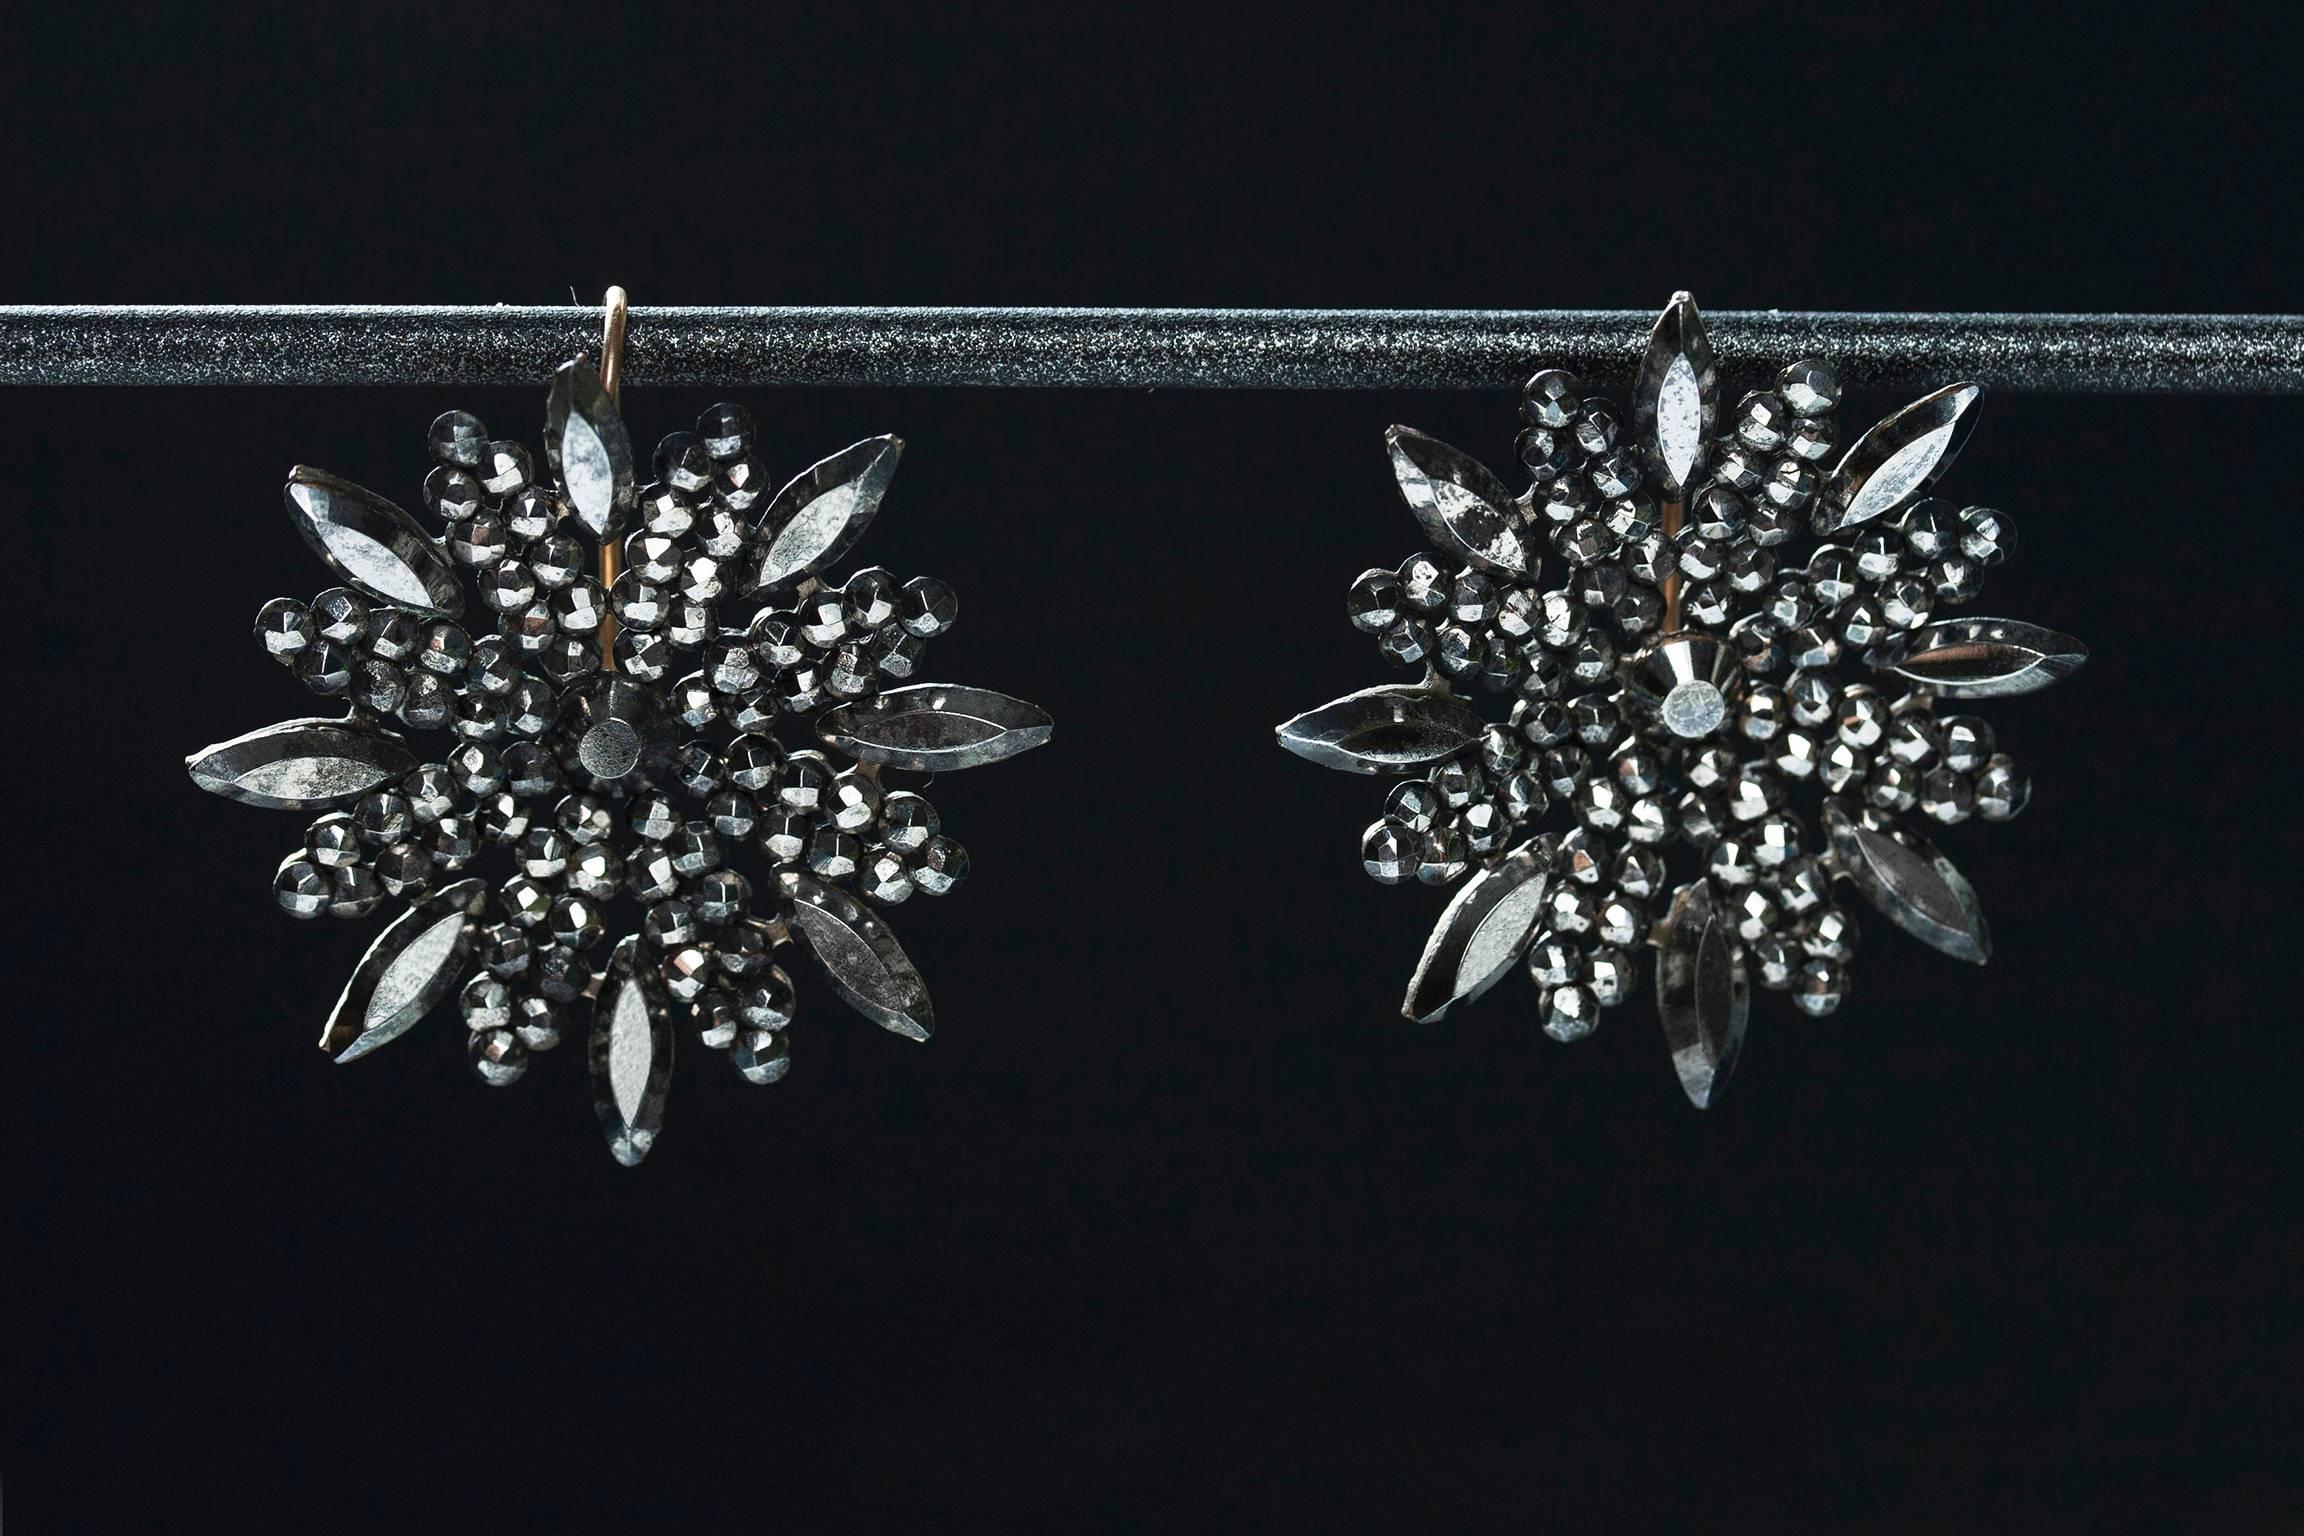 C.1870. A beautiful pair of Victorian cut steel earrings of ‘snowflake’ motif. Cut steel jewelry was introduced in the Georgian era around the mid-1700s. This particular type of jewelry is made with polished steel-faceted studs to create a